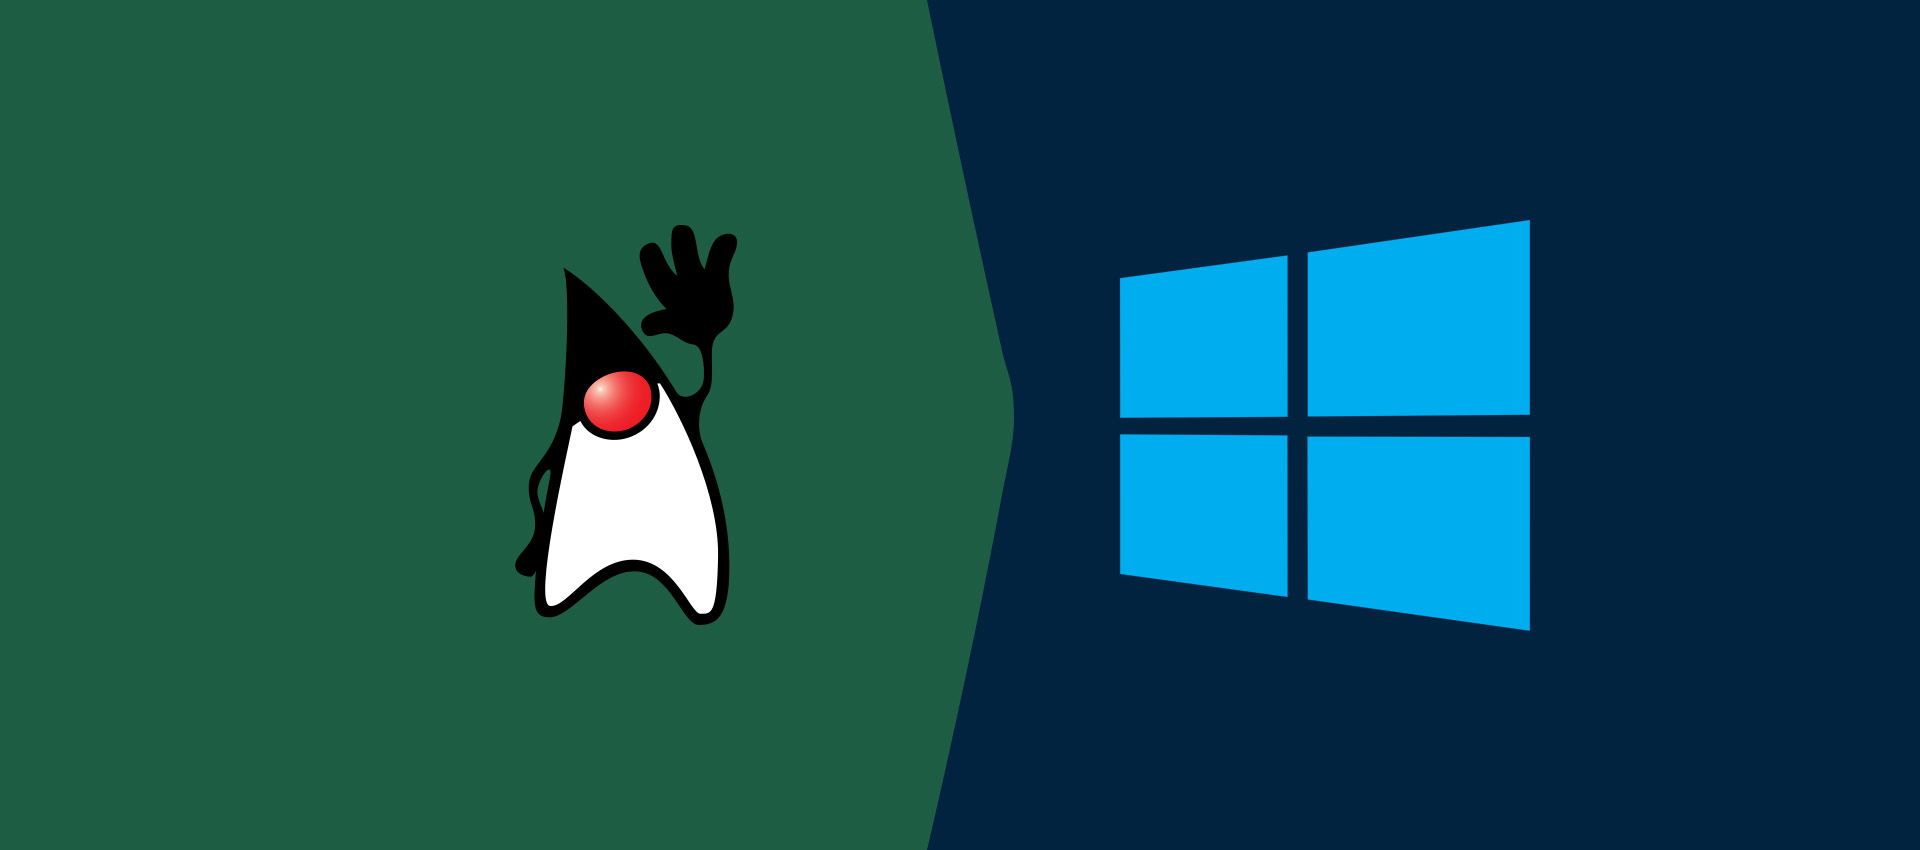 How To Install OpenJDK 13 On Windows